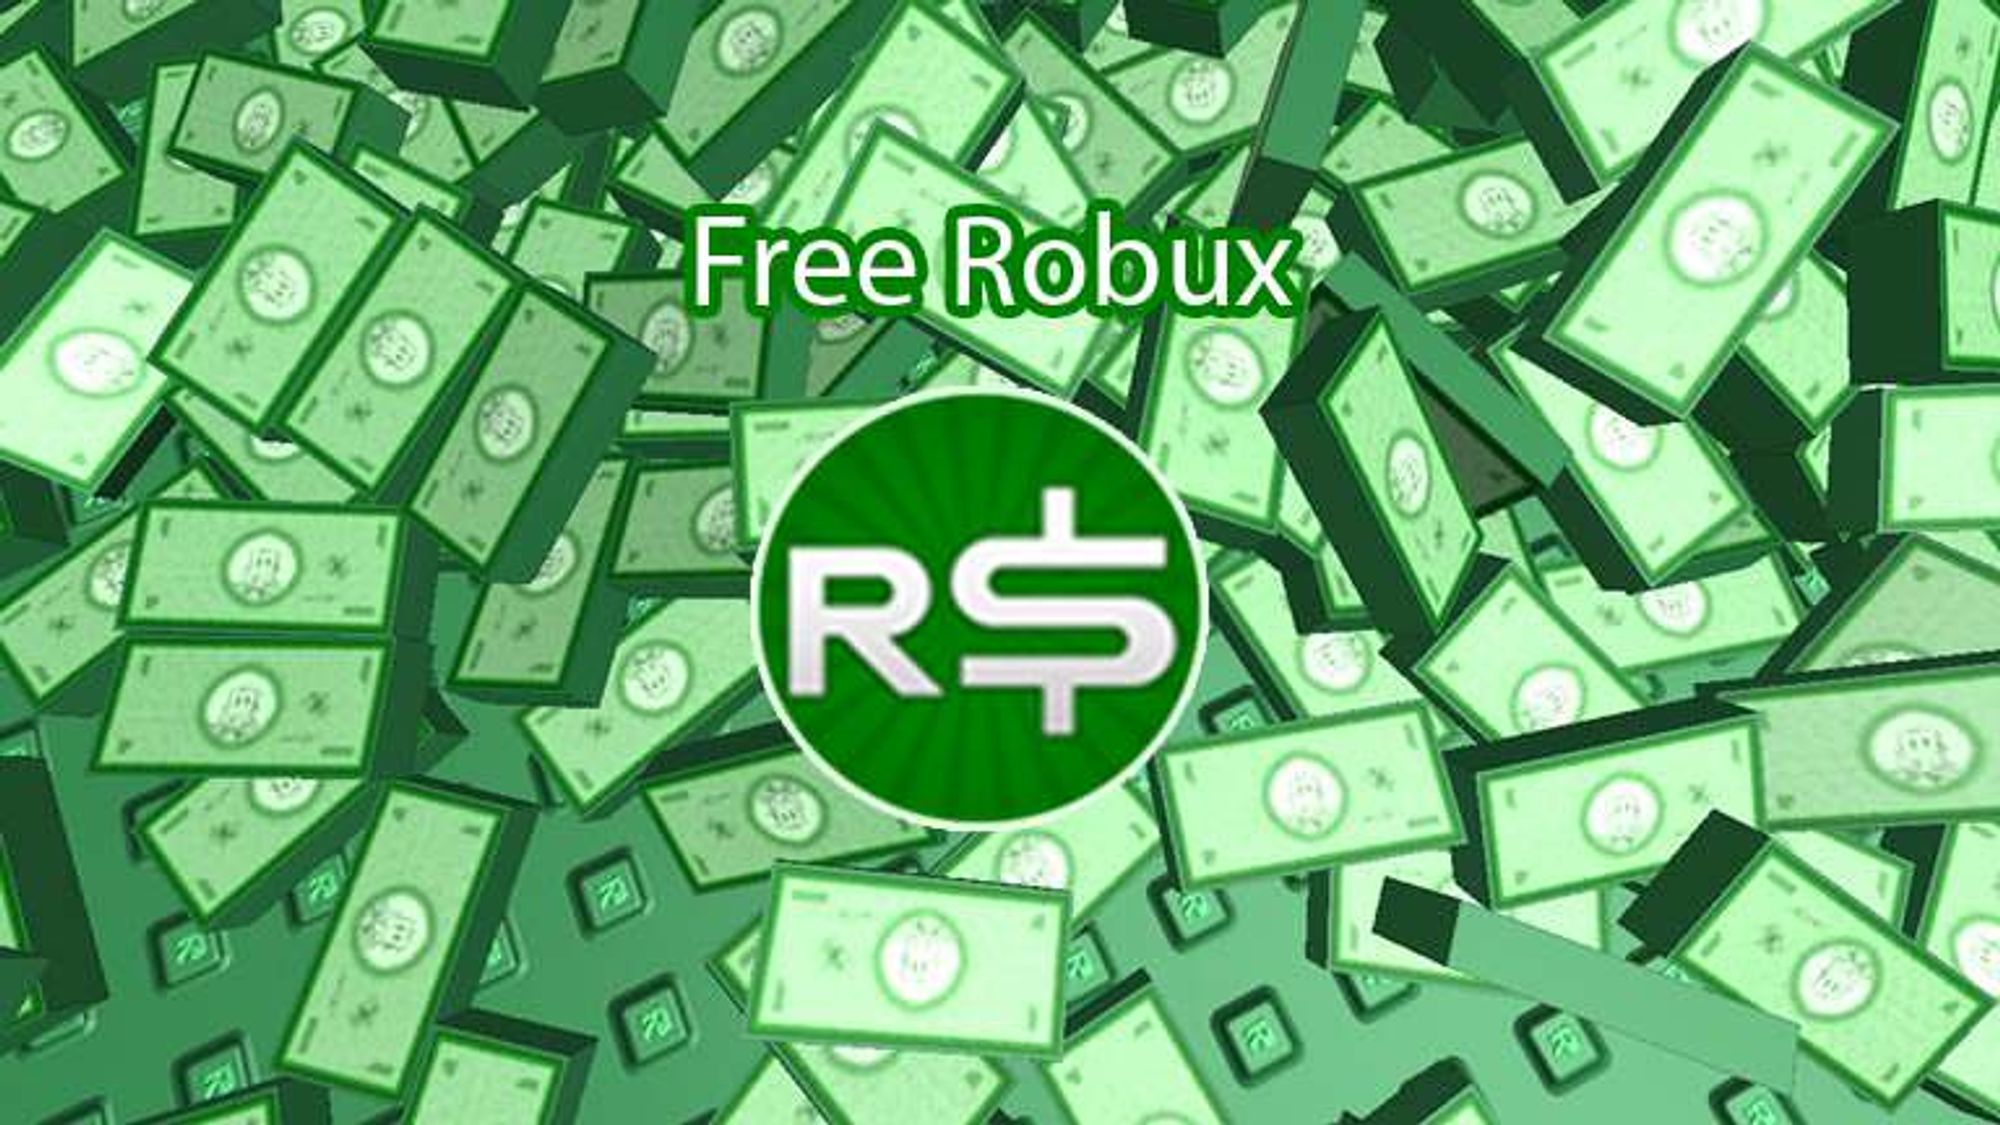 Roblox Robux Hack Free Robux Generator No Human Verification Or Survey - musicturnsintothinair free roblox robux hack generator no